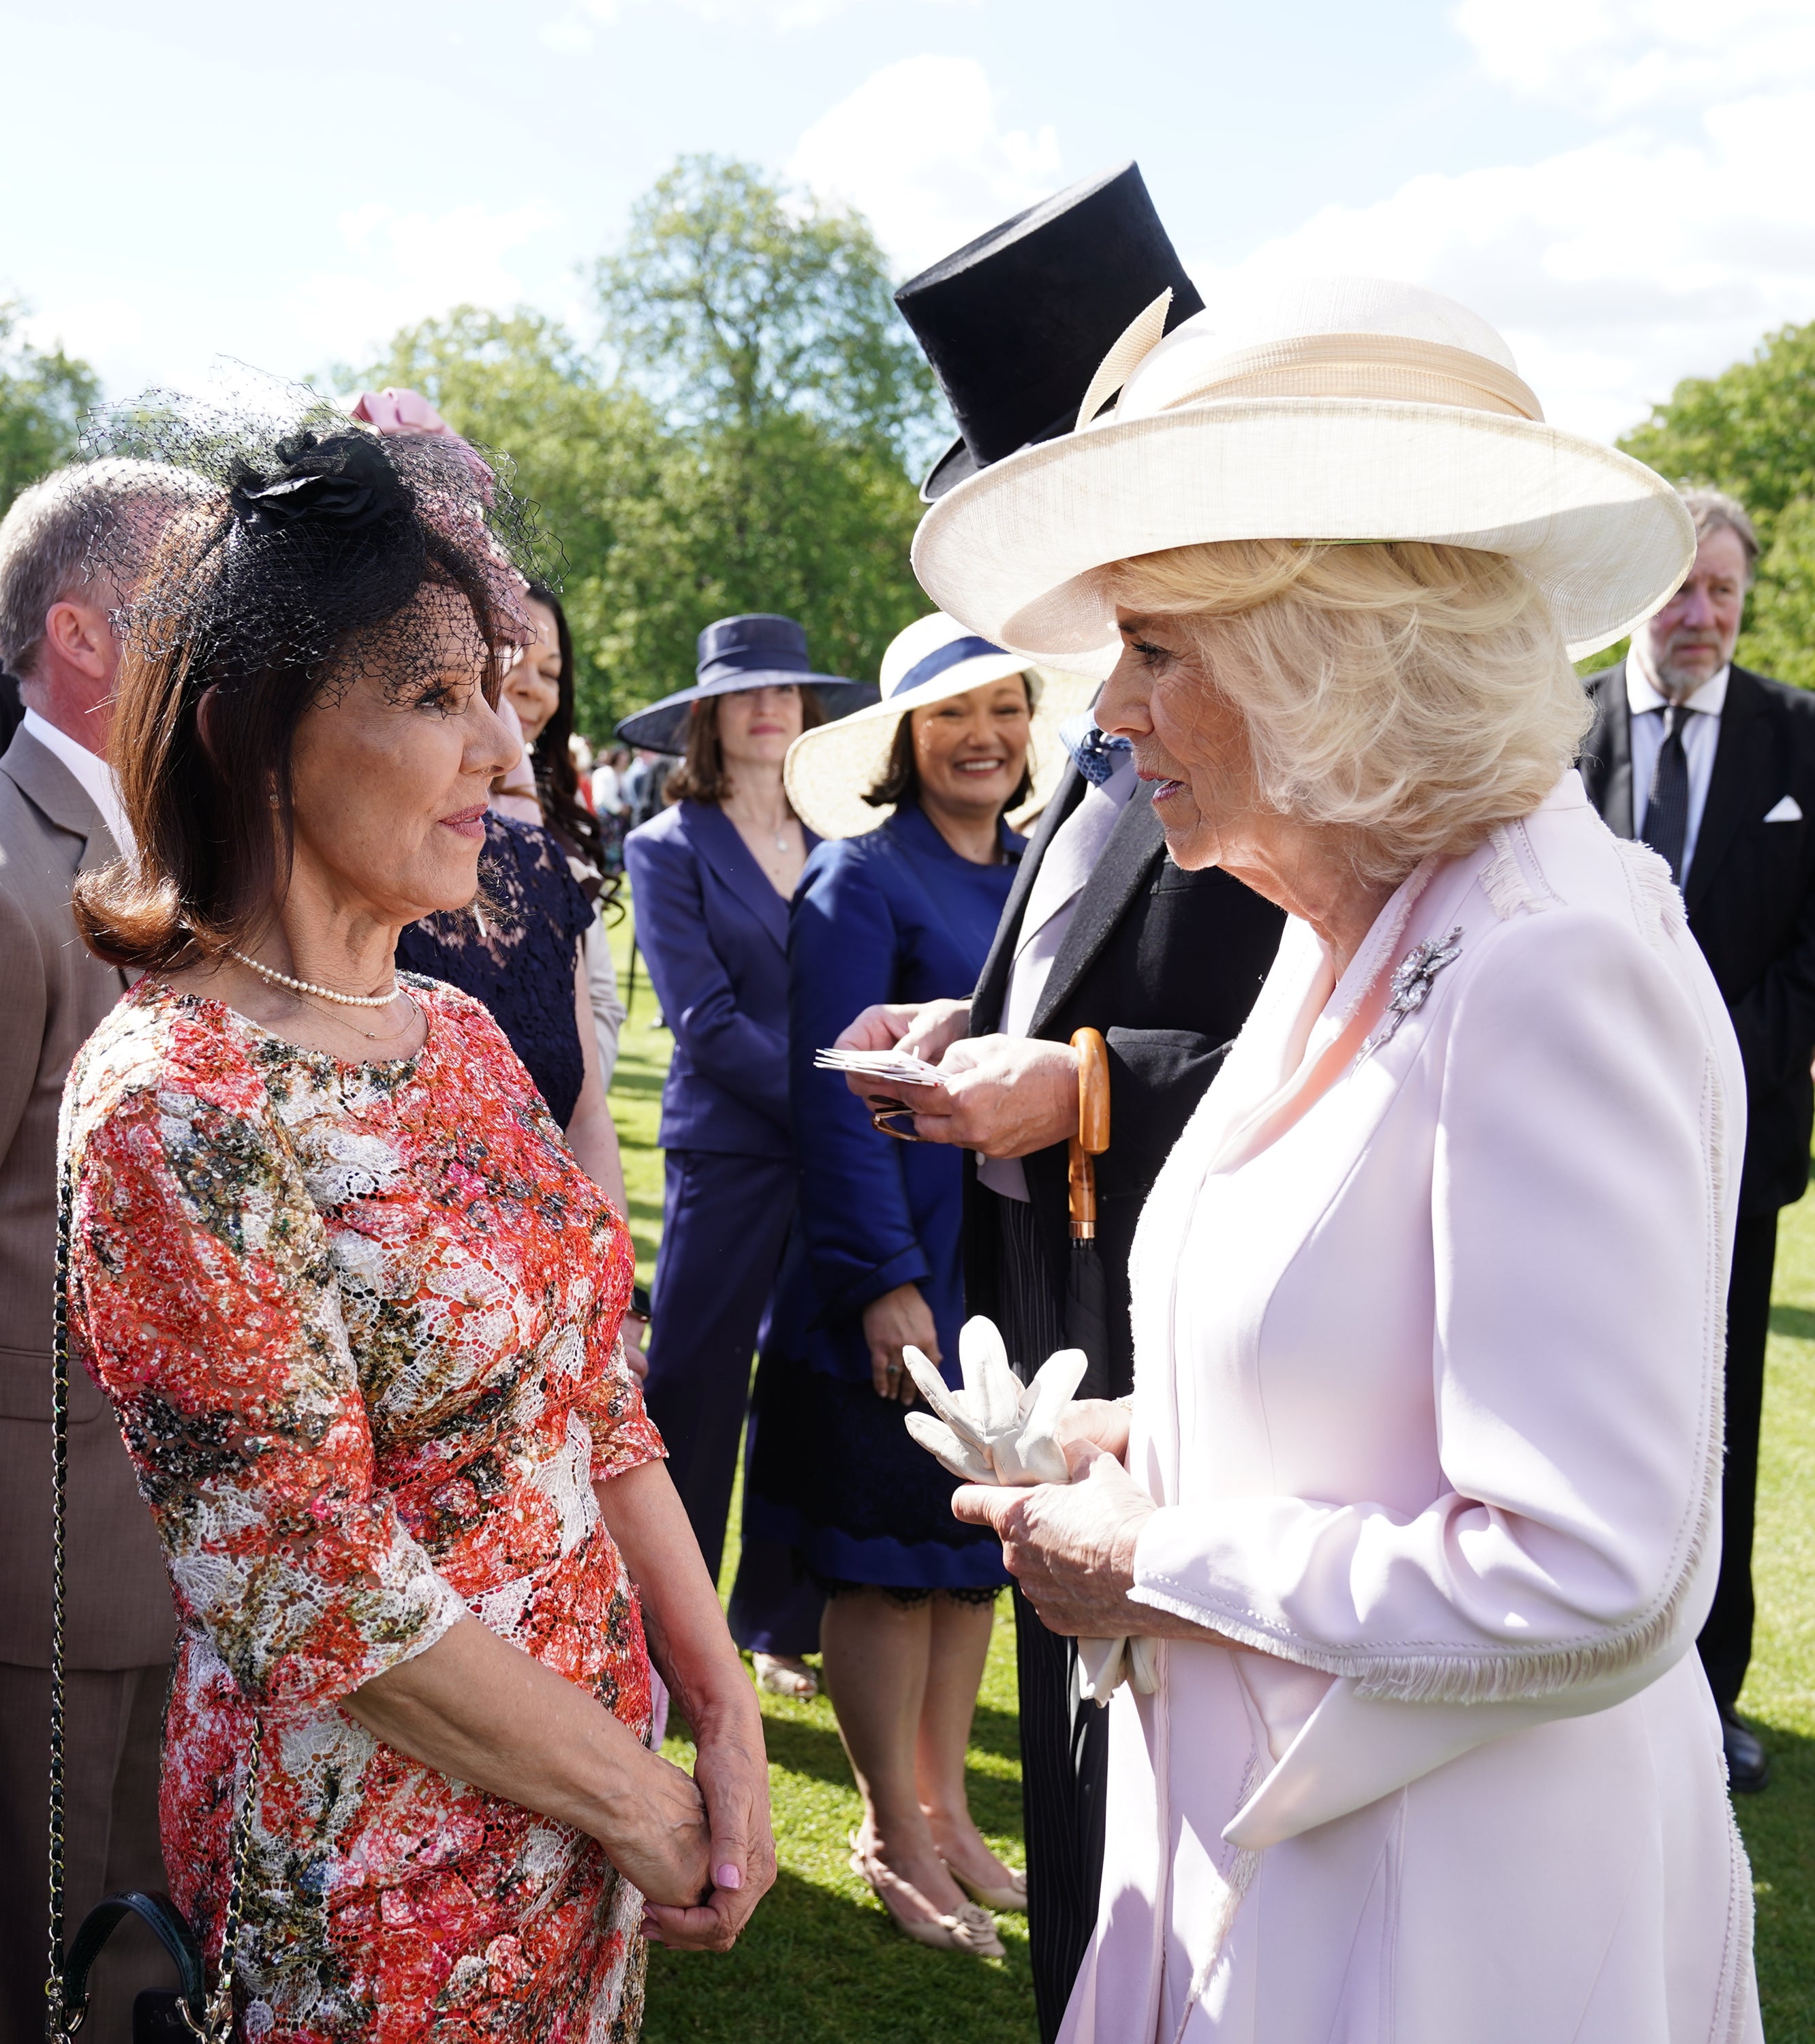 Dame Arlene Phillips chats with the Queen in the spring sunshine